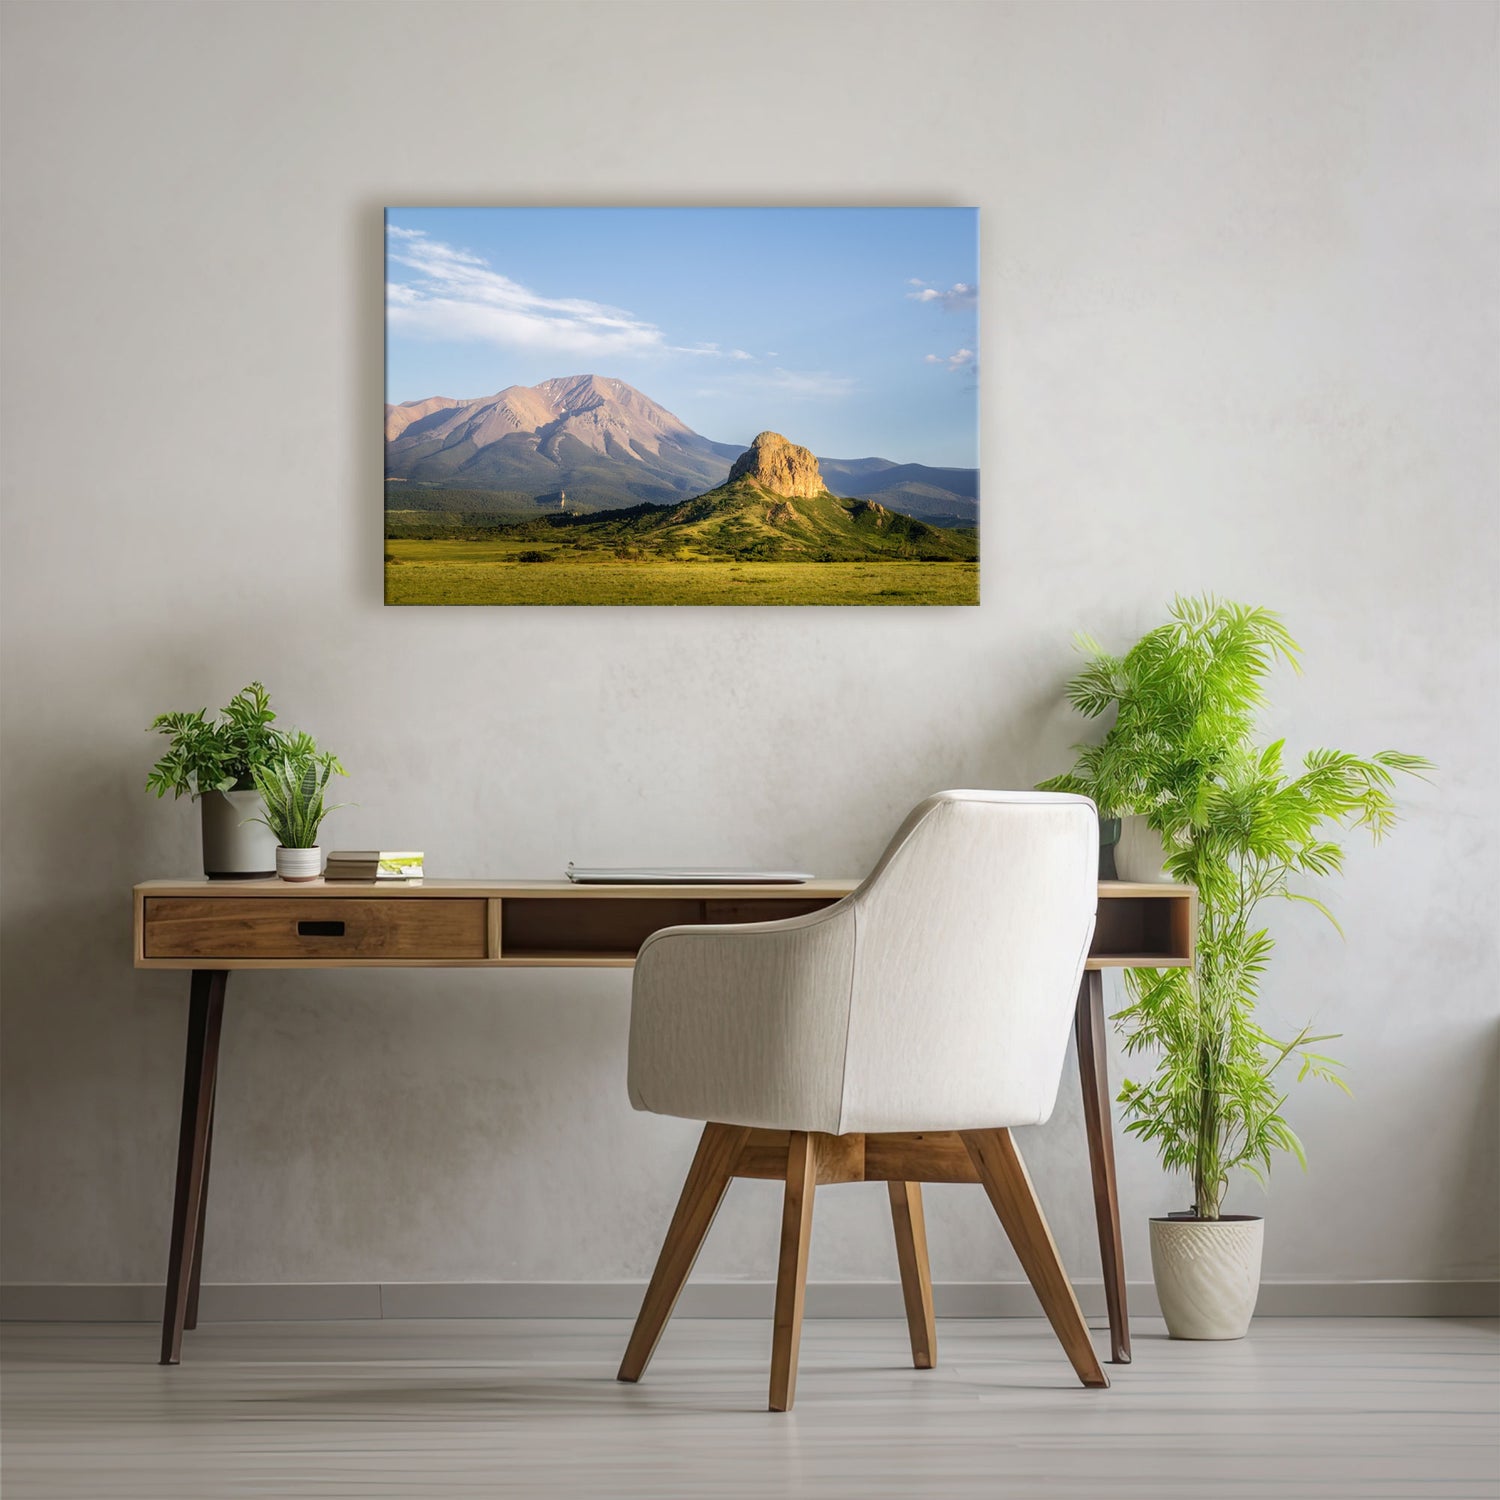 Wall art canvas depicting the tranquil Colorado landscape, showcasing the vibrant colors and peaceful scenery of Goemmer Butte in a nature photography canvas.